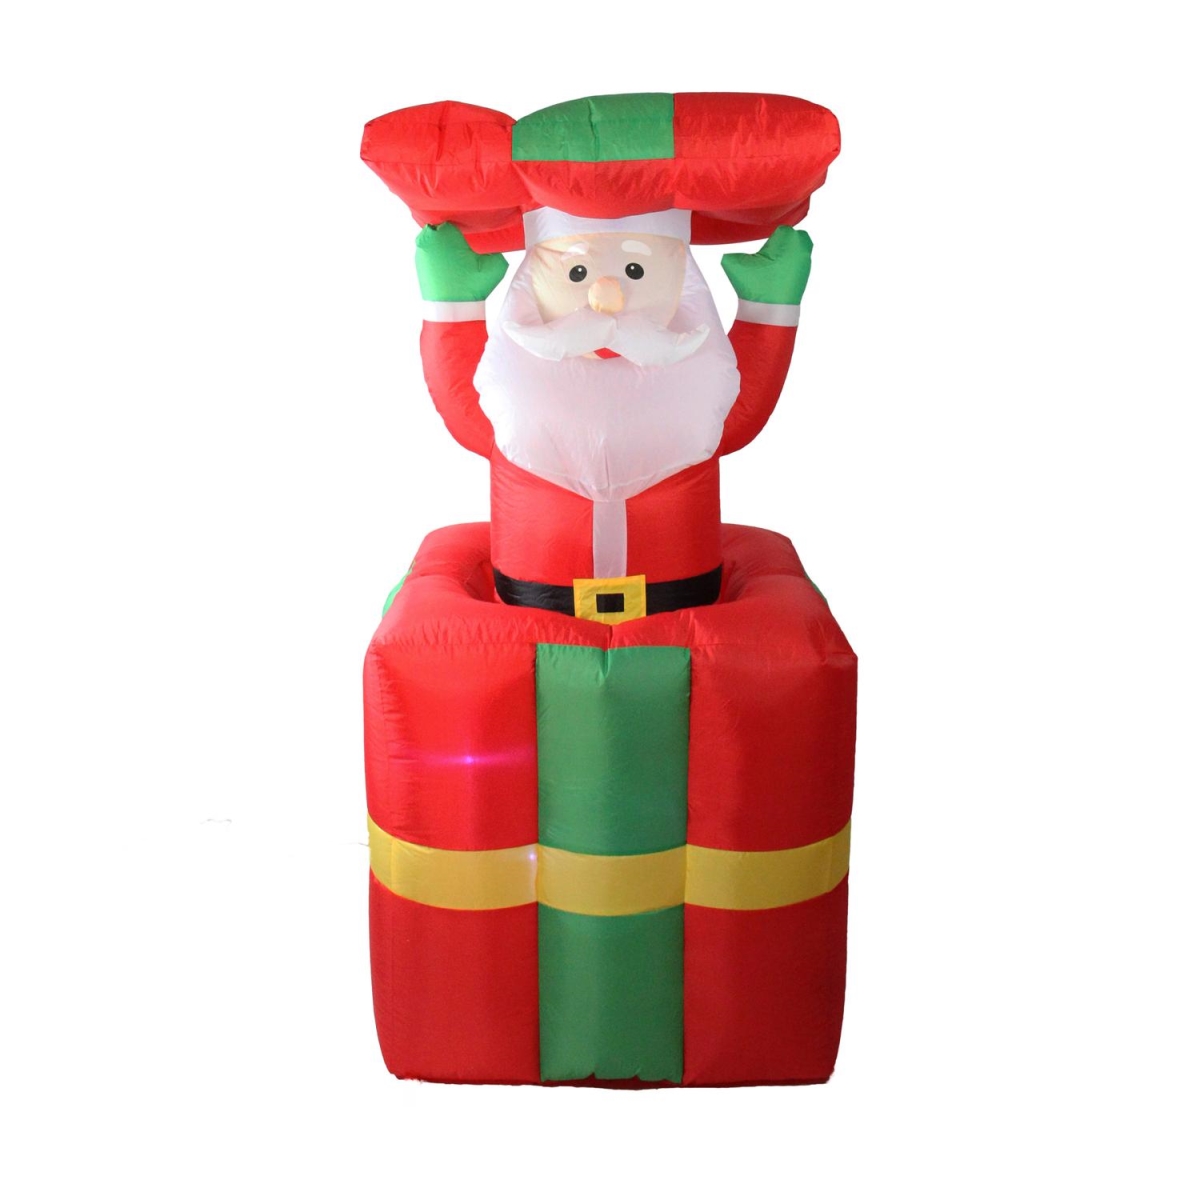 32634955 5 Ft. Lighted Inflatable Pop Up Santa Claus In Gift Box Christmas Outdoor Decoration